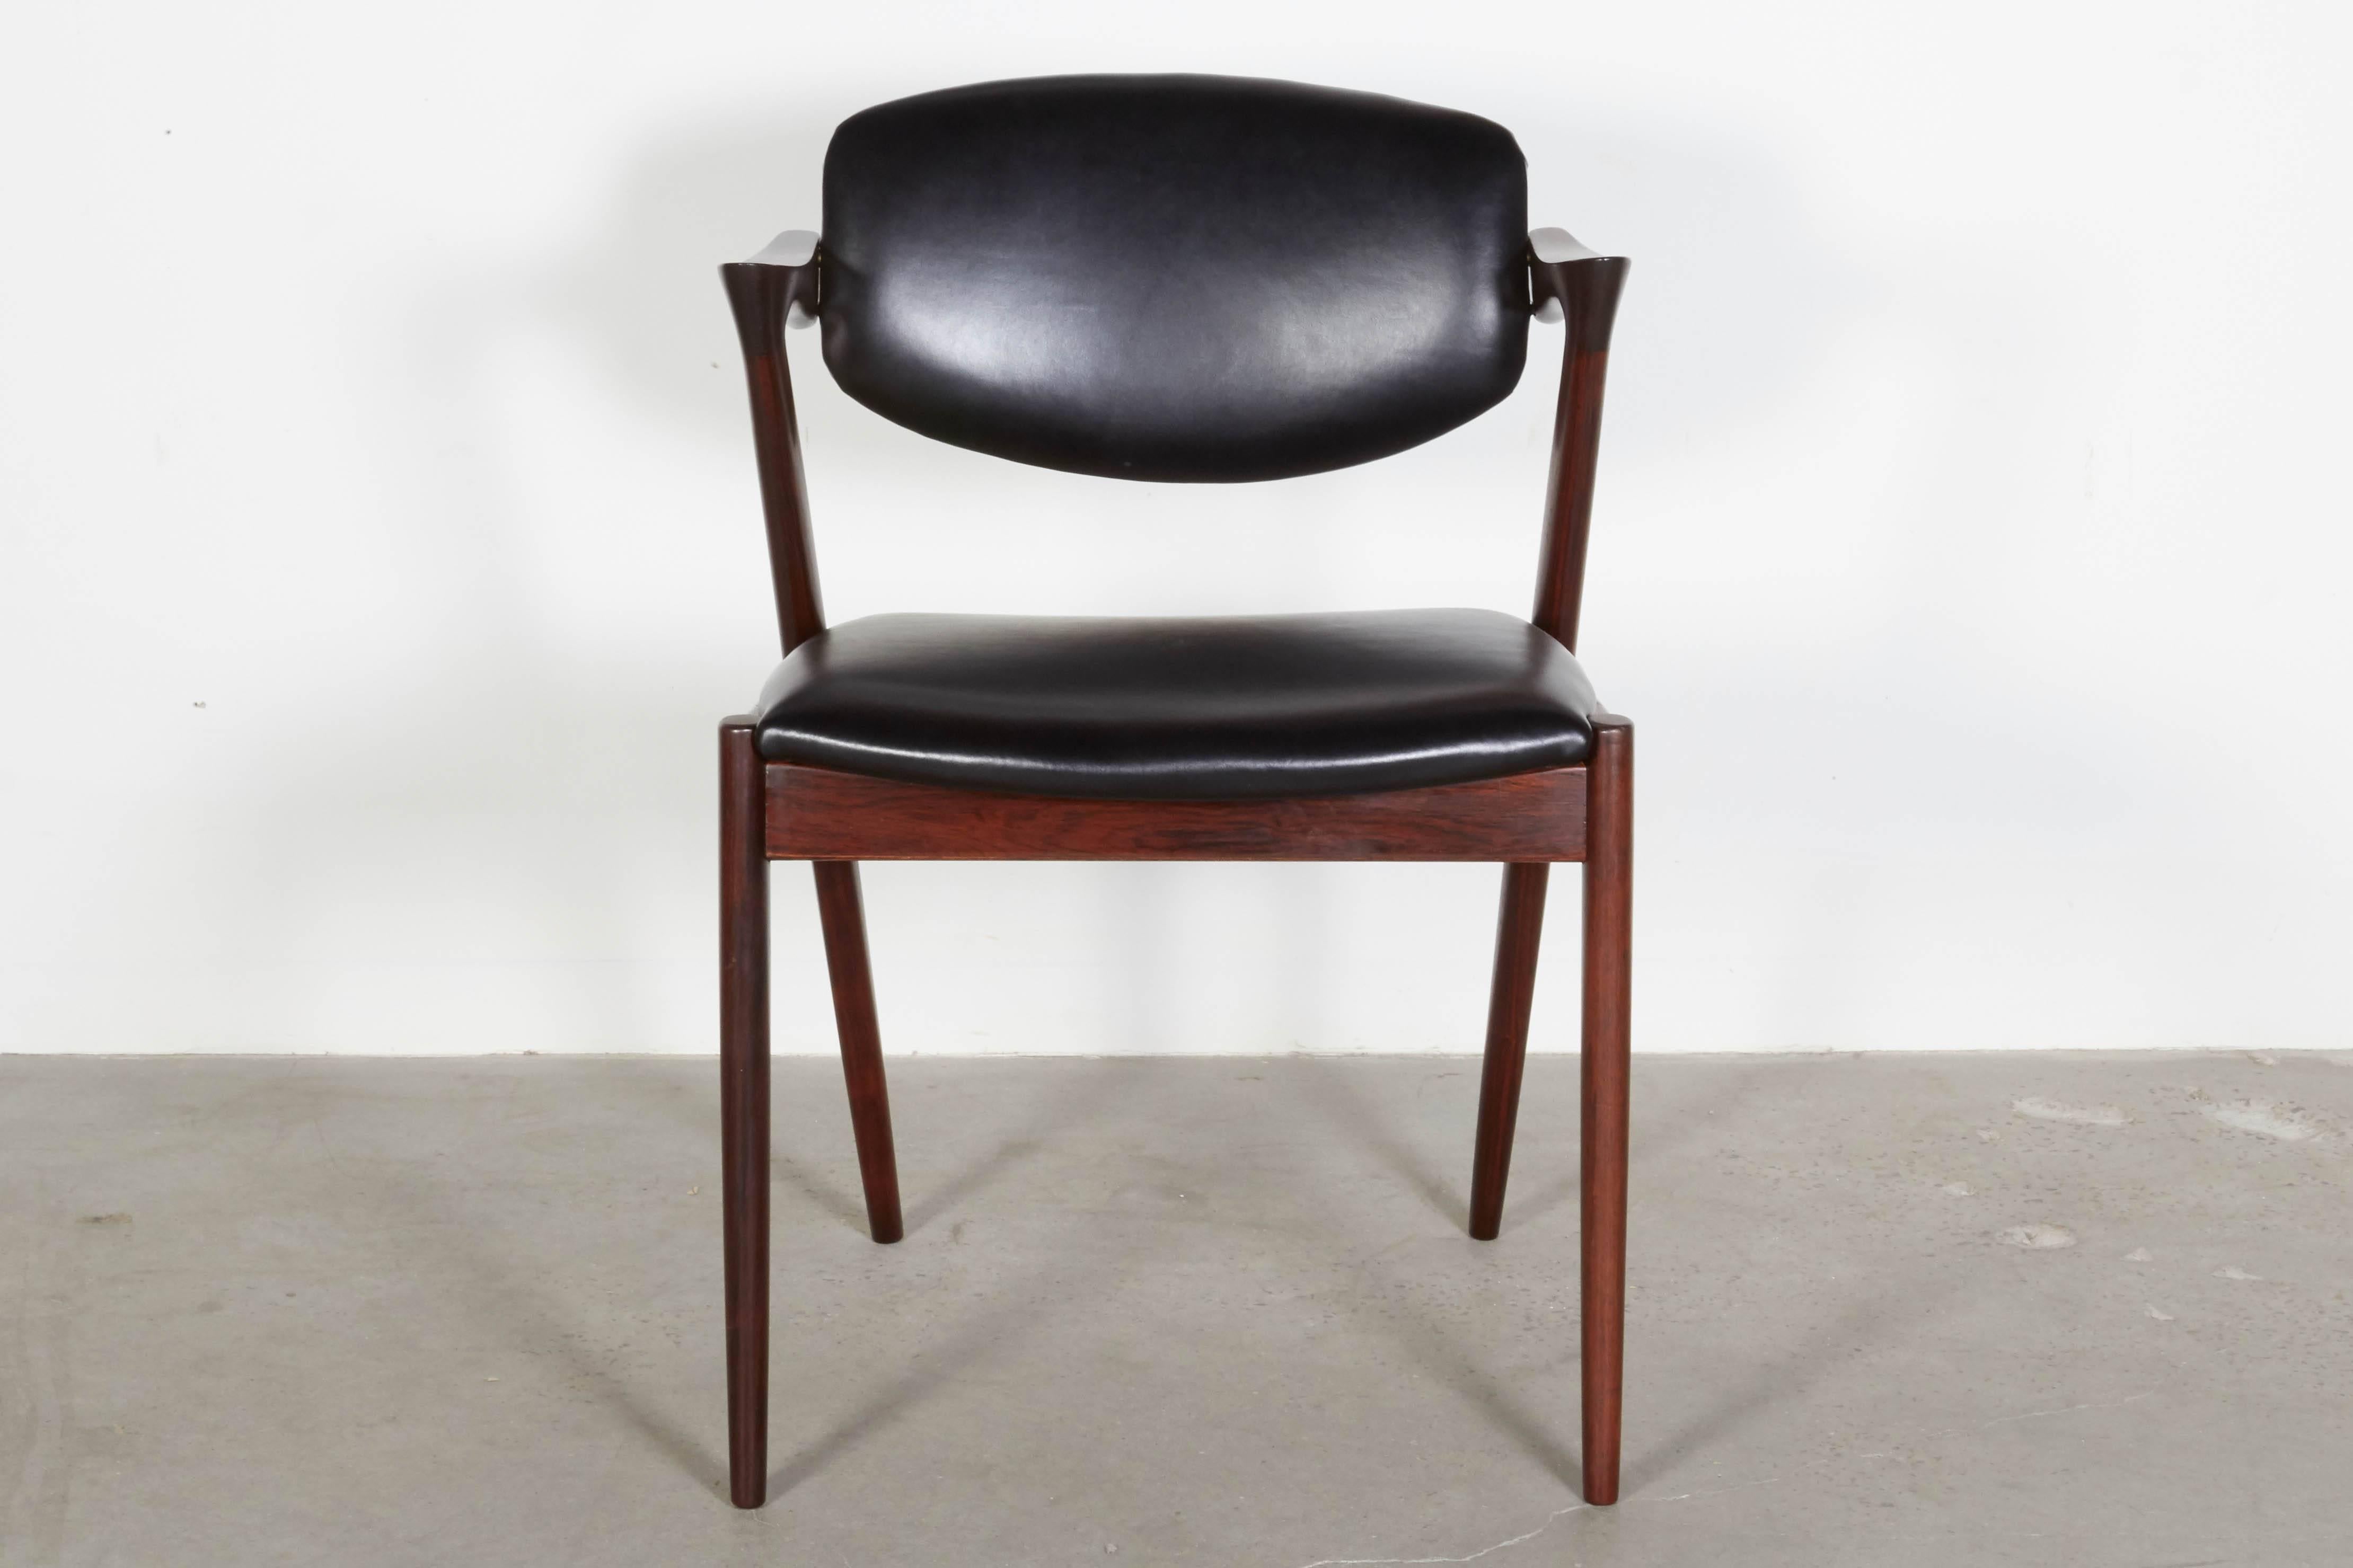 Vintage 1950s Rosewood Danish Dining Chairs by Kai Kristiansen

These Mid-Century side chairs are in like-new condition. The swivel back that adjusts to the angle of your back makes it like a little lounge chair at the dining table. The most